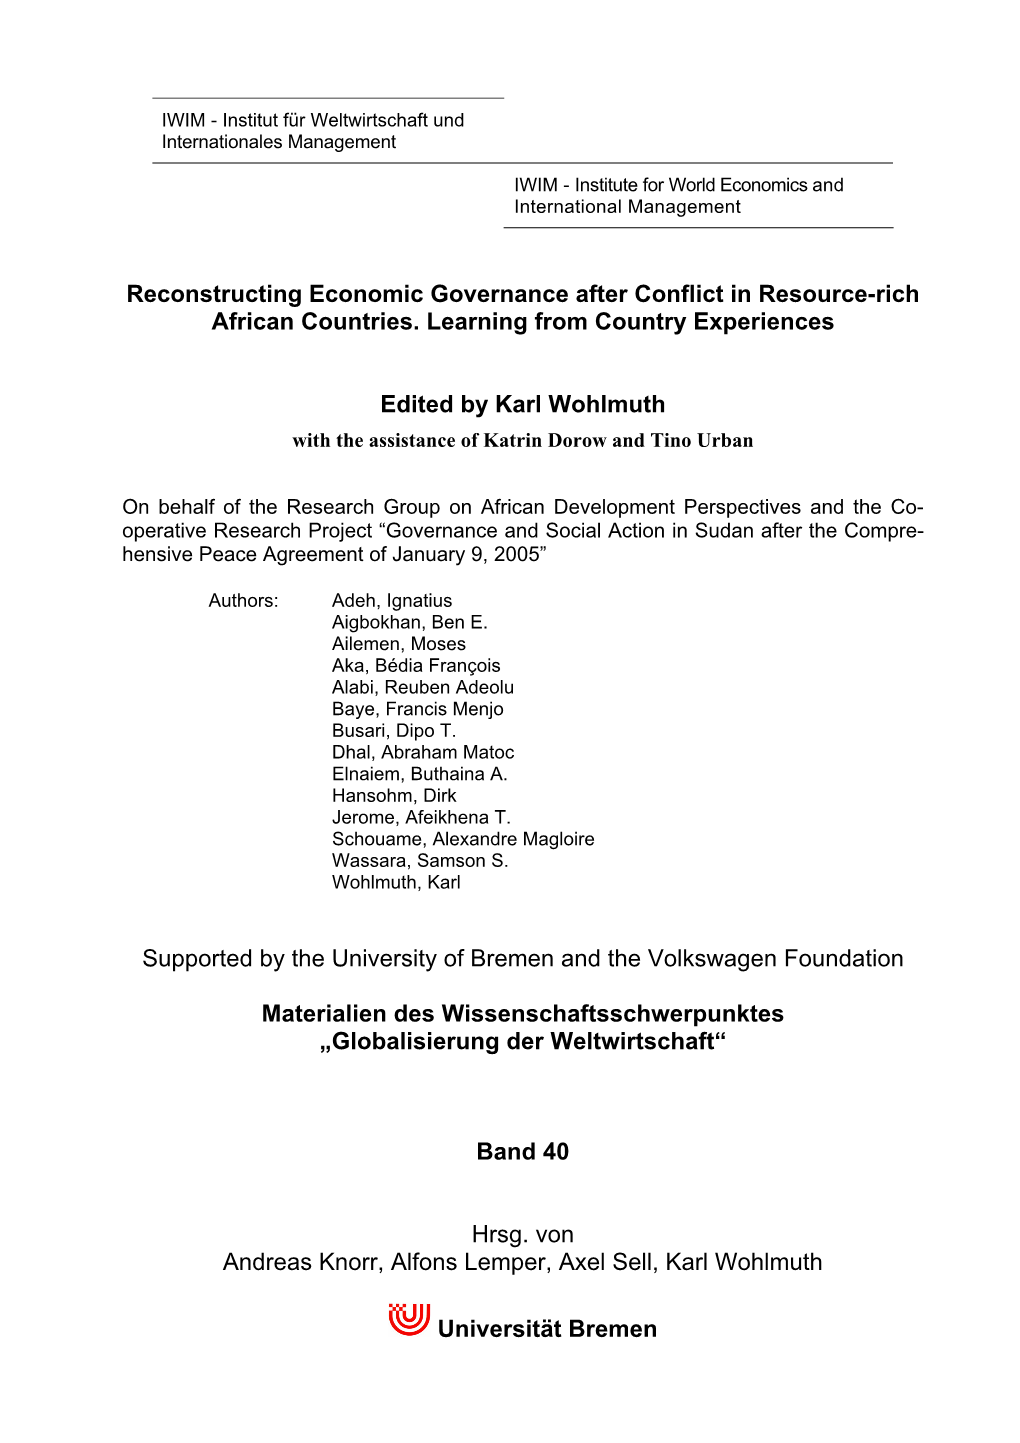 Reconstructing Economic Governance After Conflict in Resource-Rich African Countries